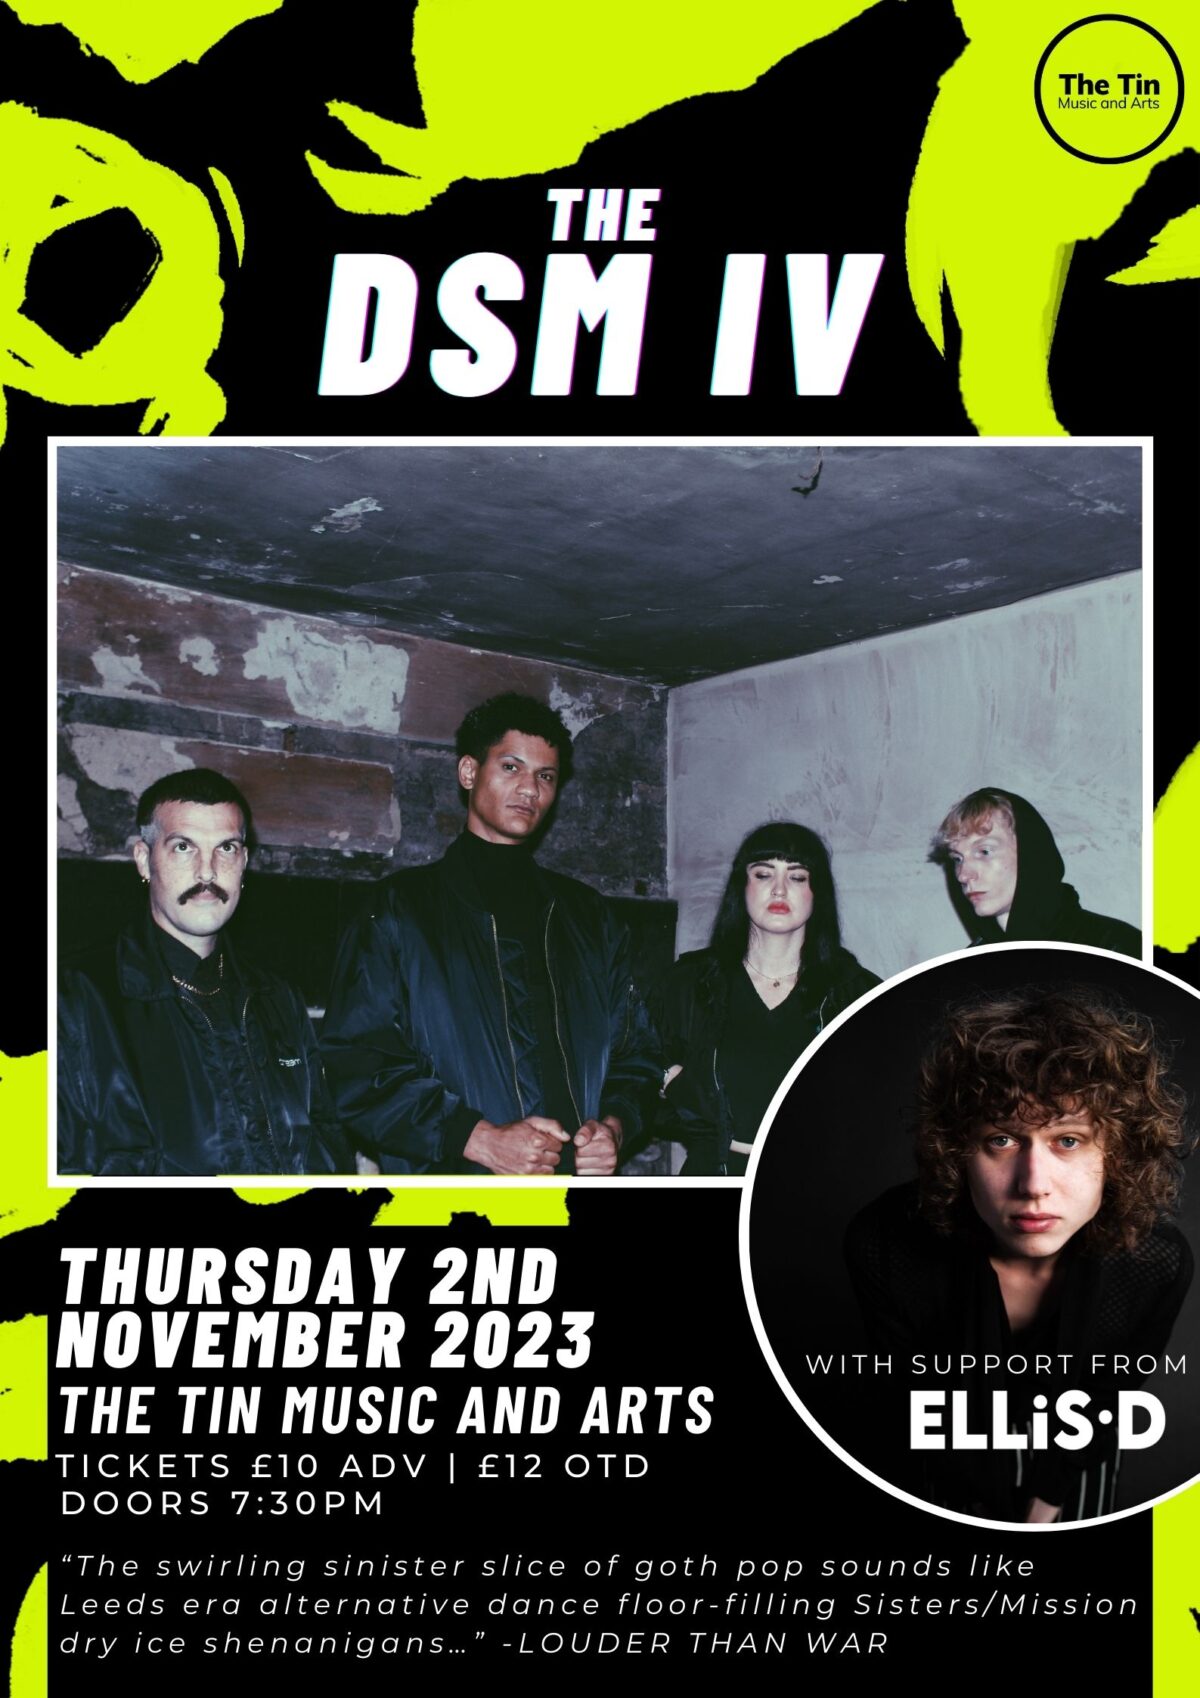 Poster for DSM IV's performance at The Tin Music and Arts, with support from ELLiS.D, on Thursday 2nd November.